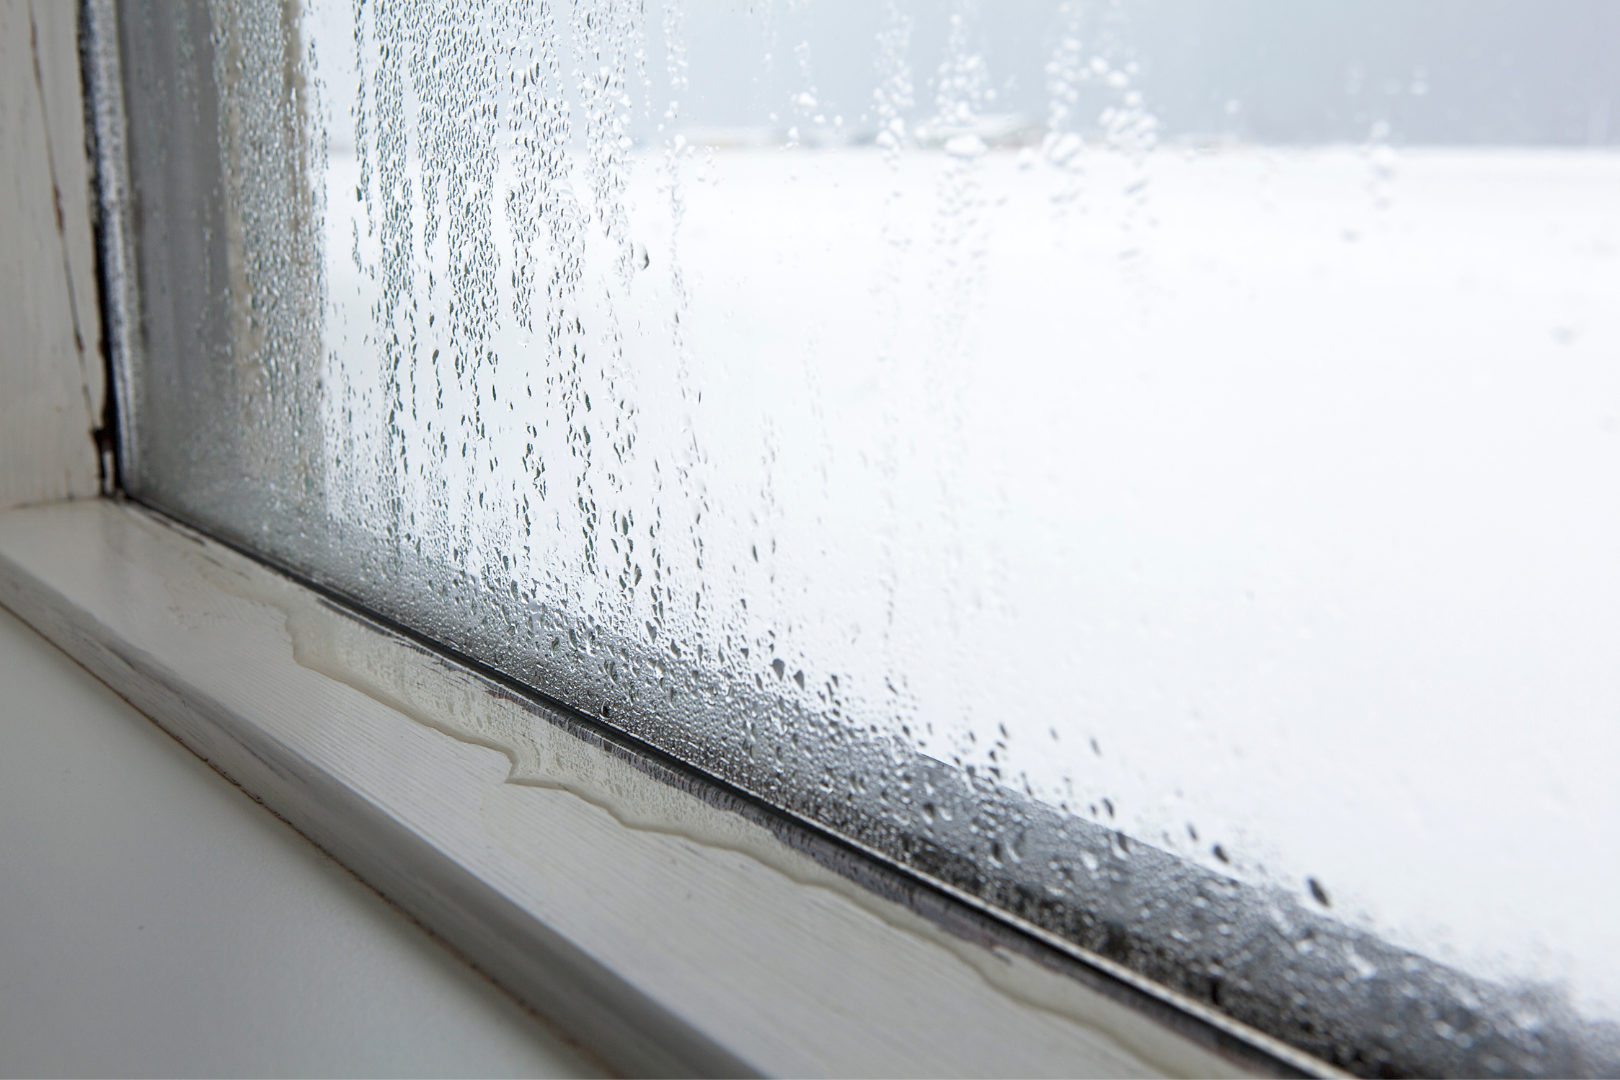 Water condensation requiring an insulated window joint